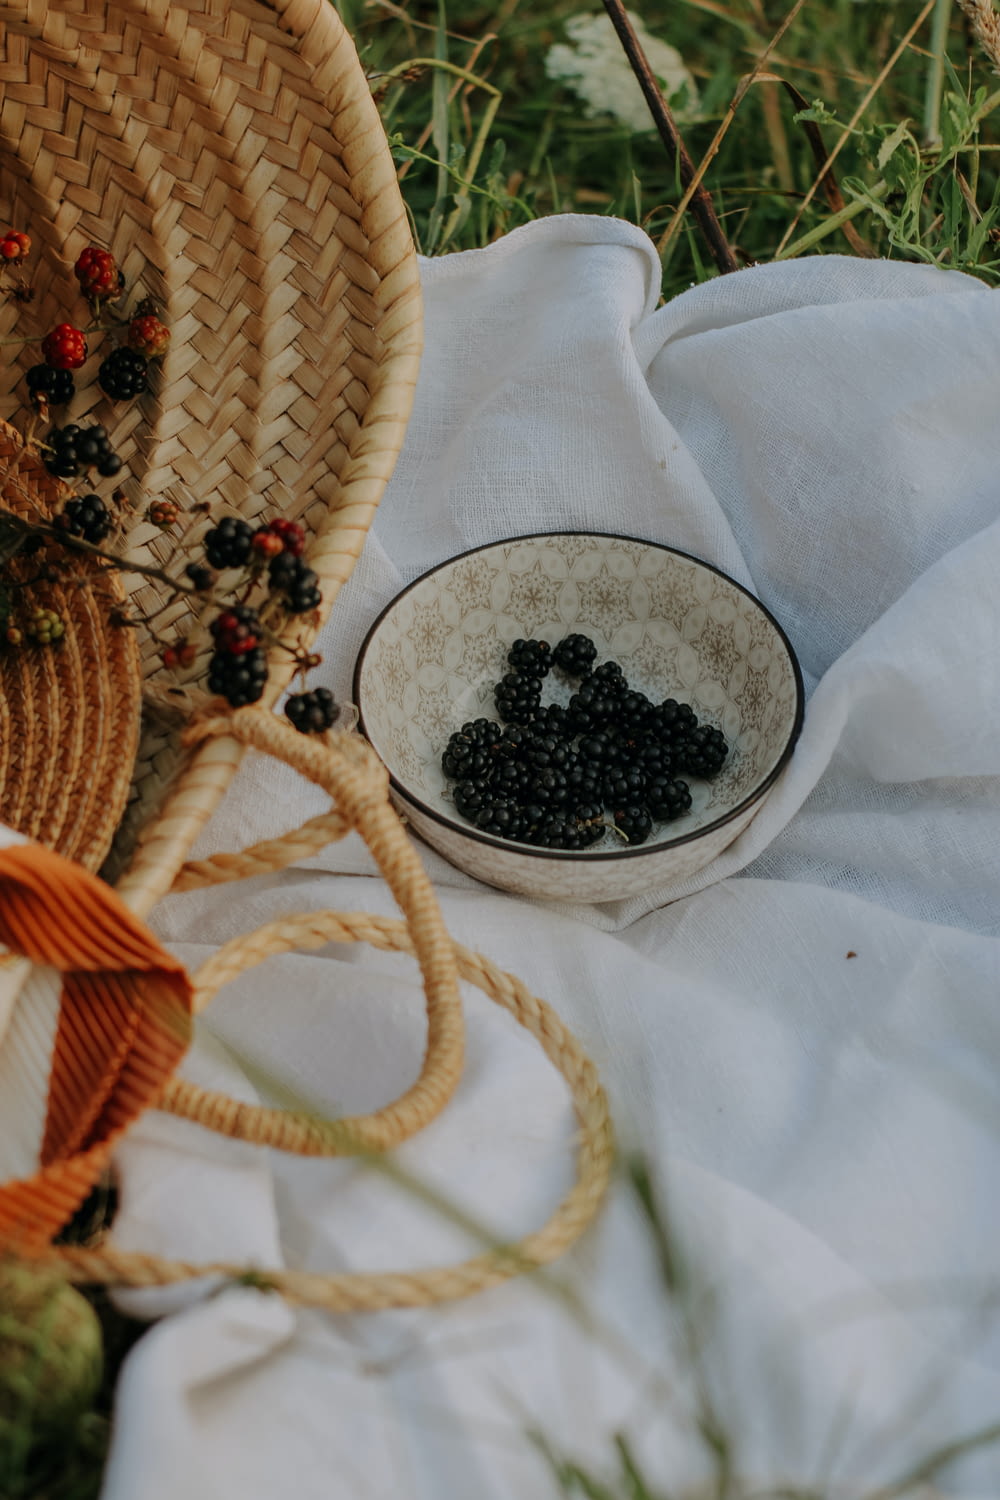 a bowl of blackberries on a white cloth